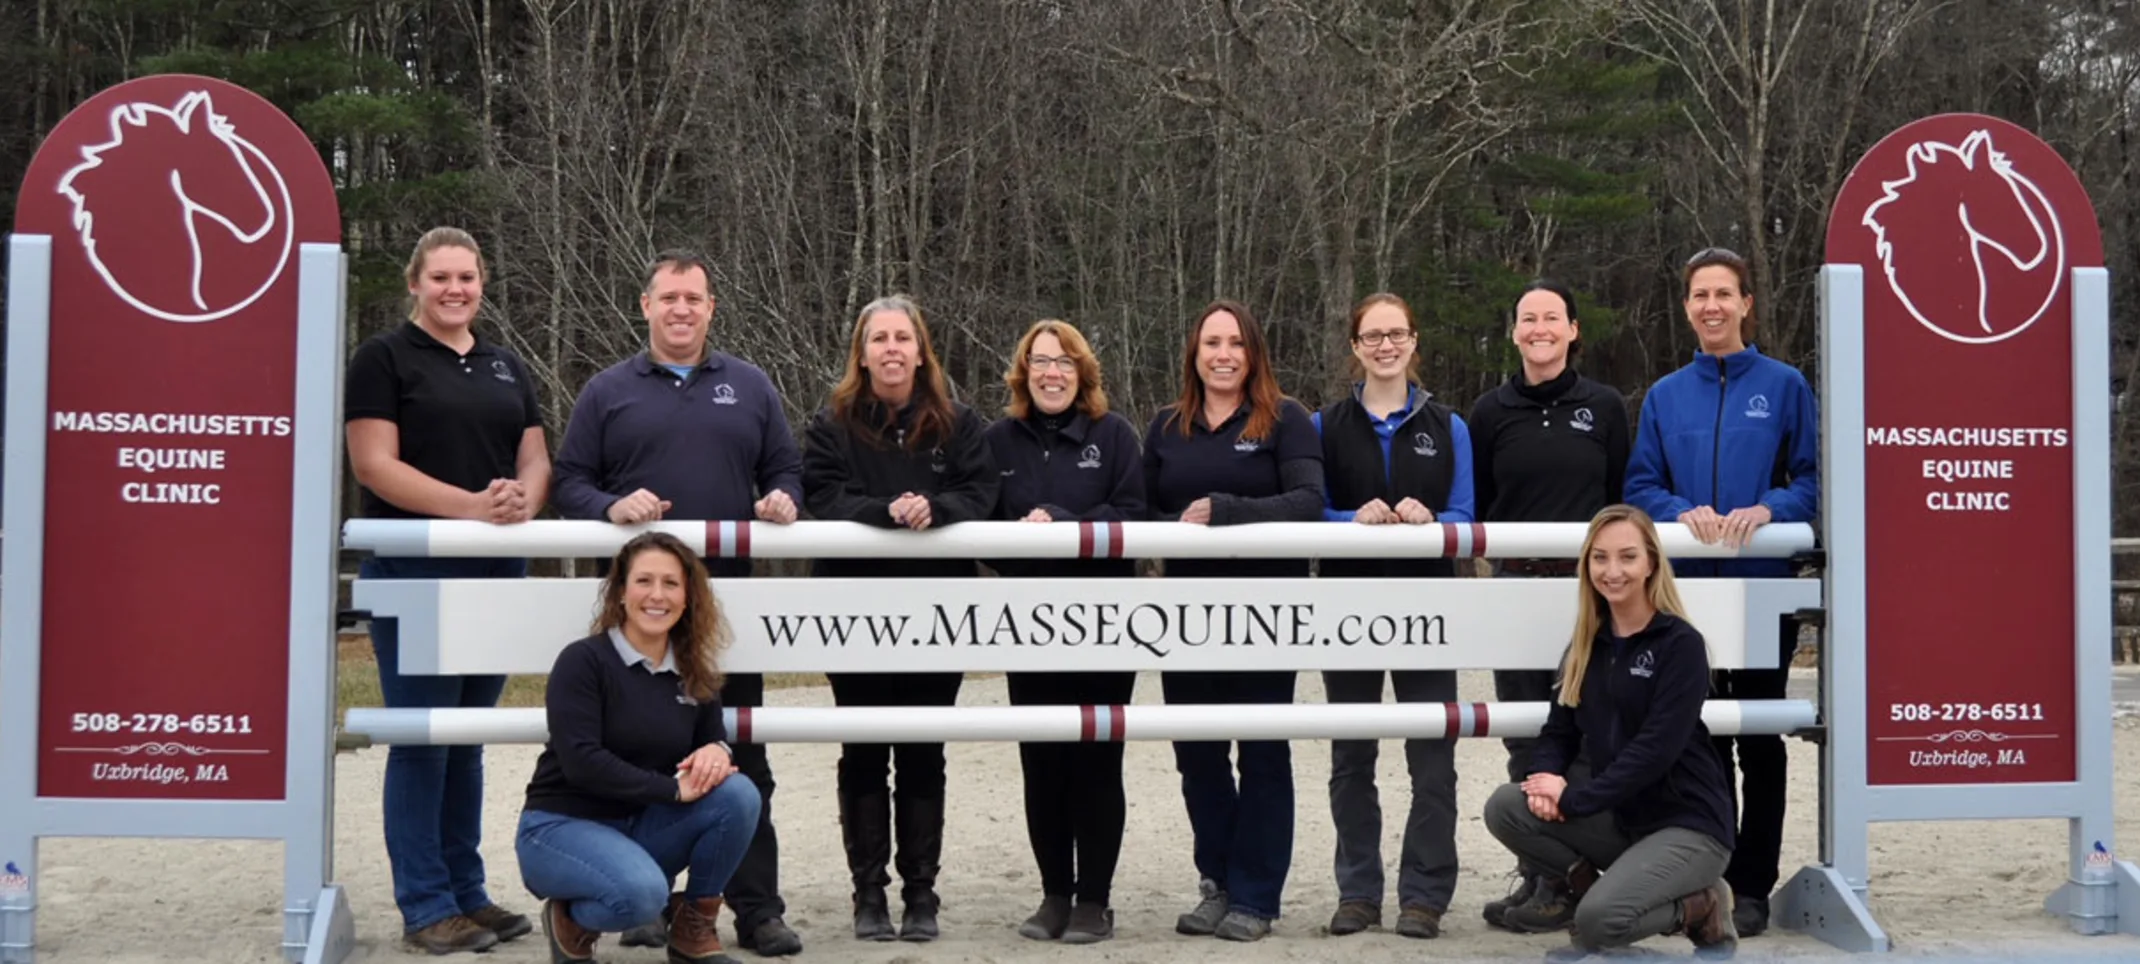 Staff standing by Mass Equine sign